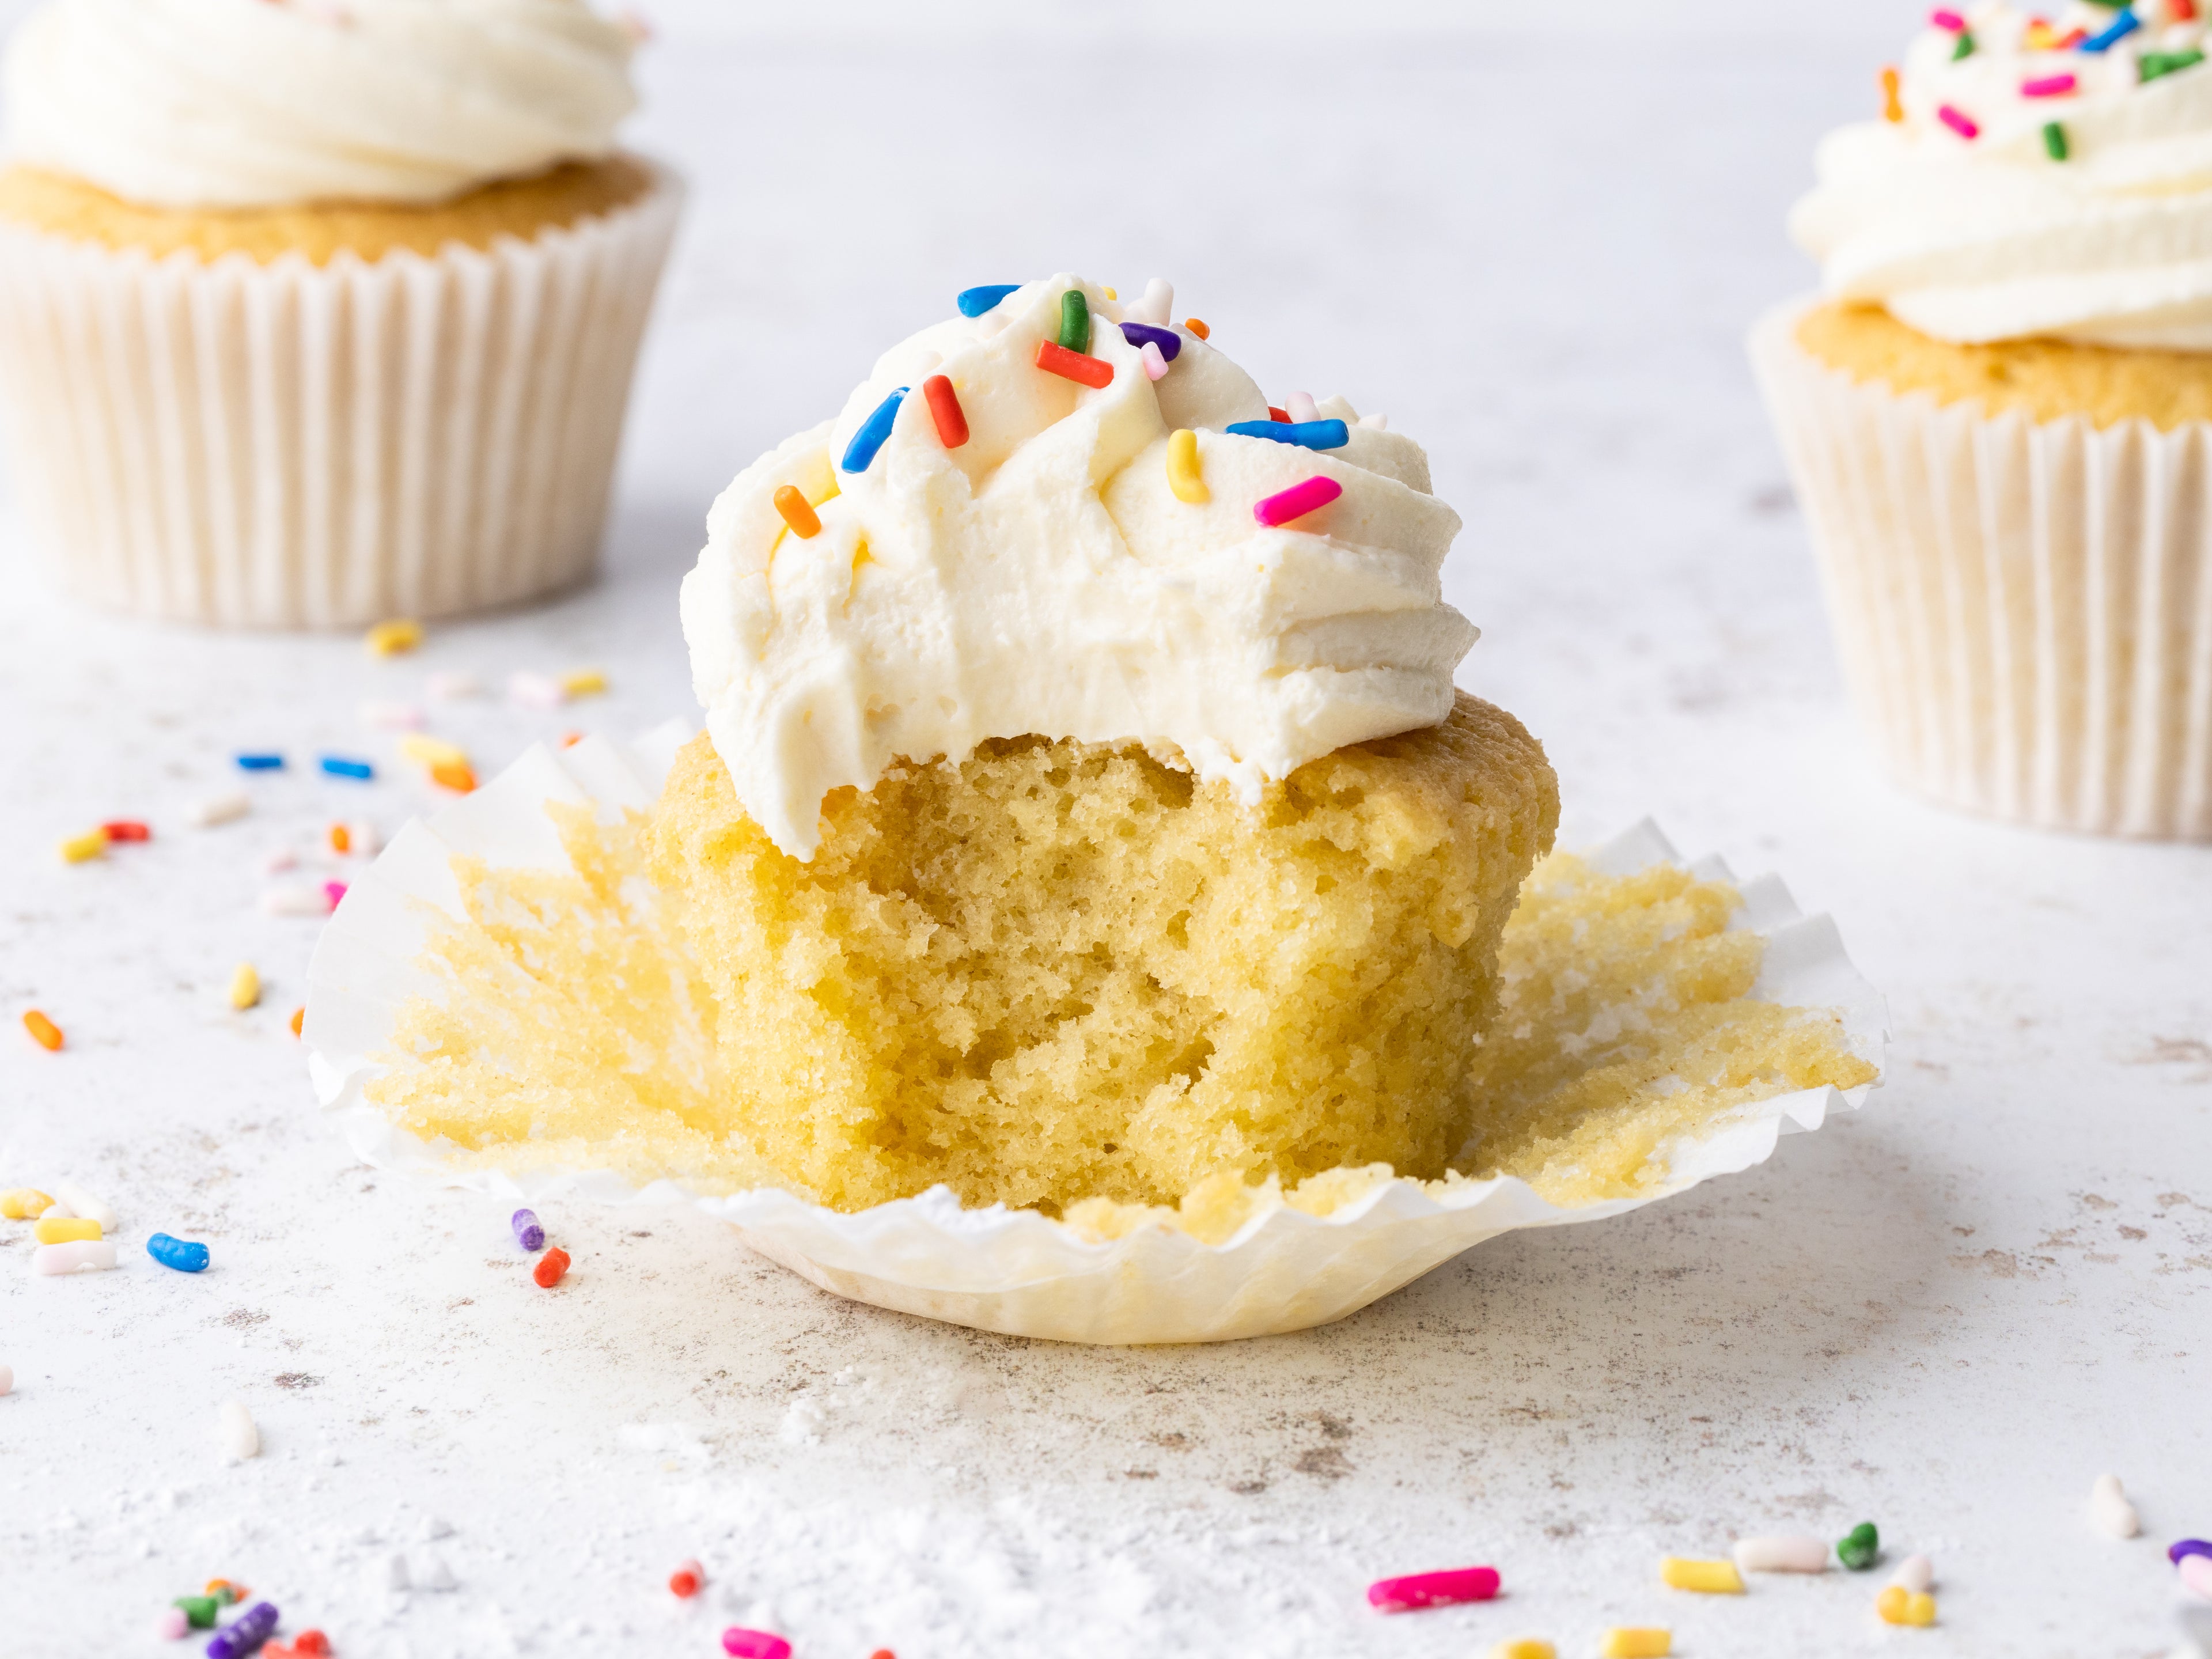 Vanilla cupcakes with buttercream and sprinkles, with a bite taken out of it